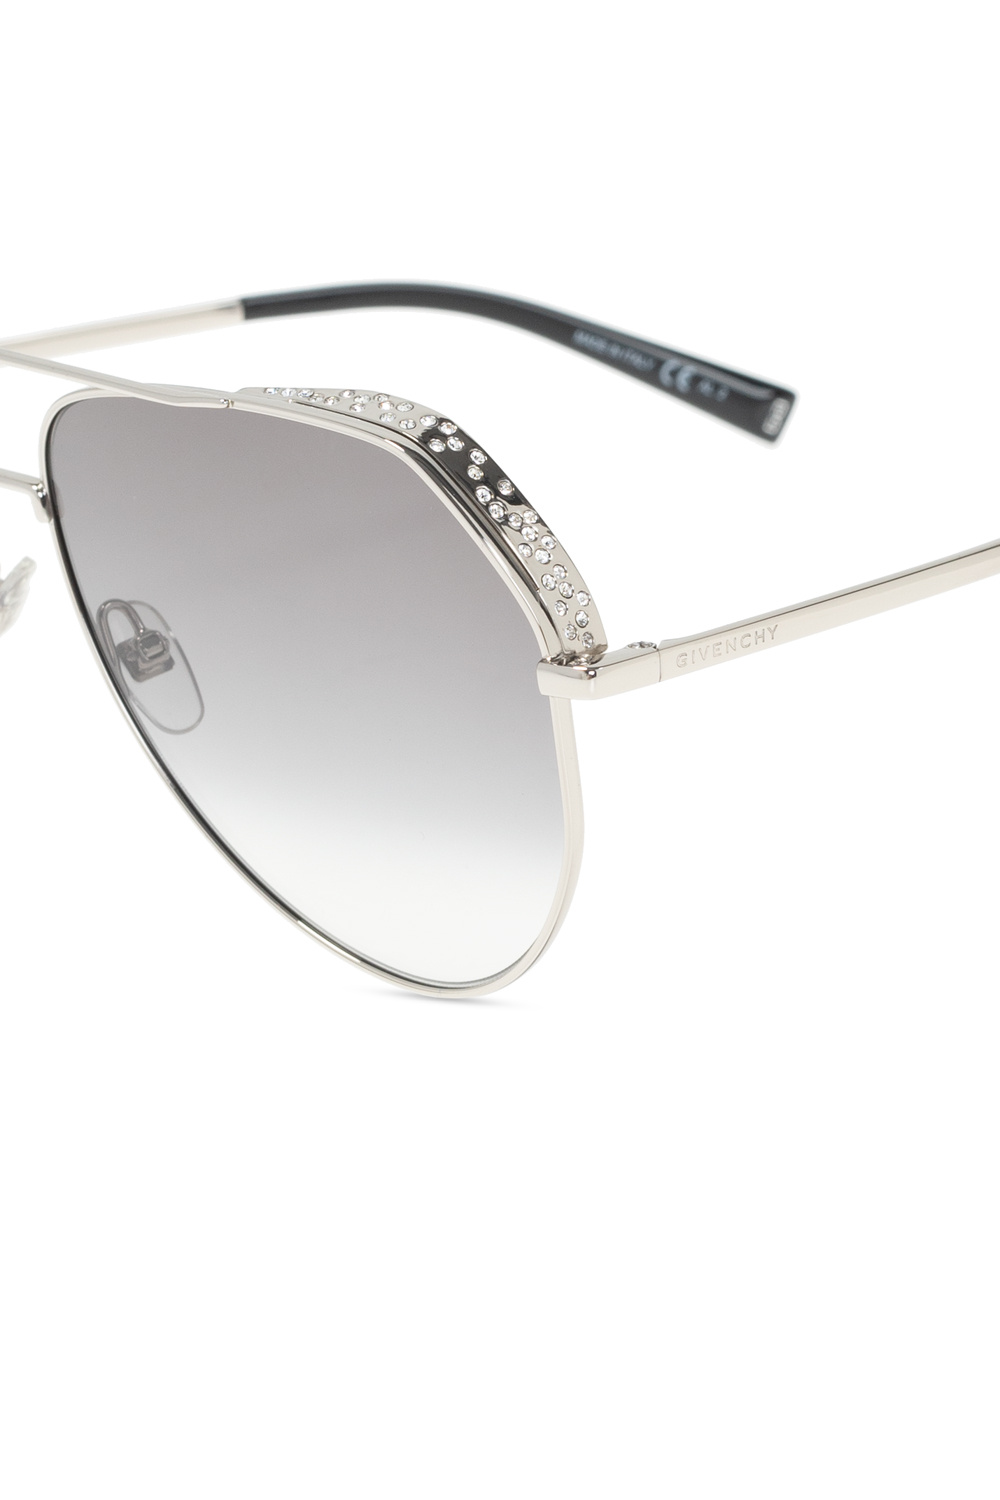 Givenchy Crystal-encrusted Butterfly-effect sunglasses